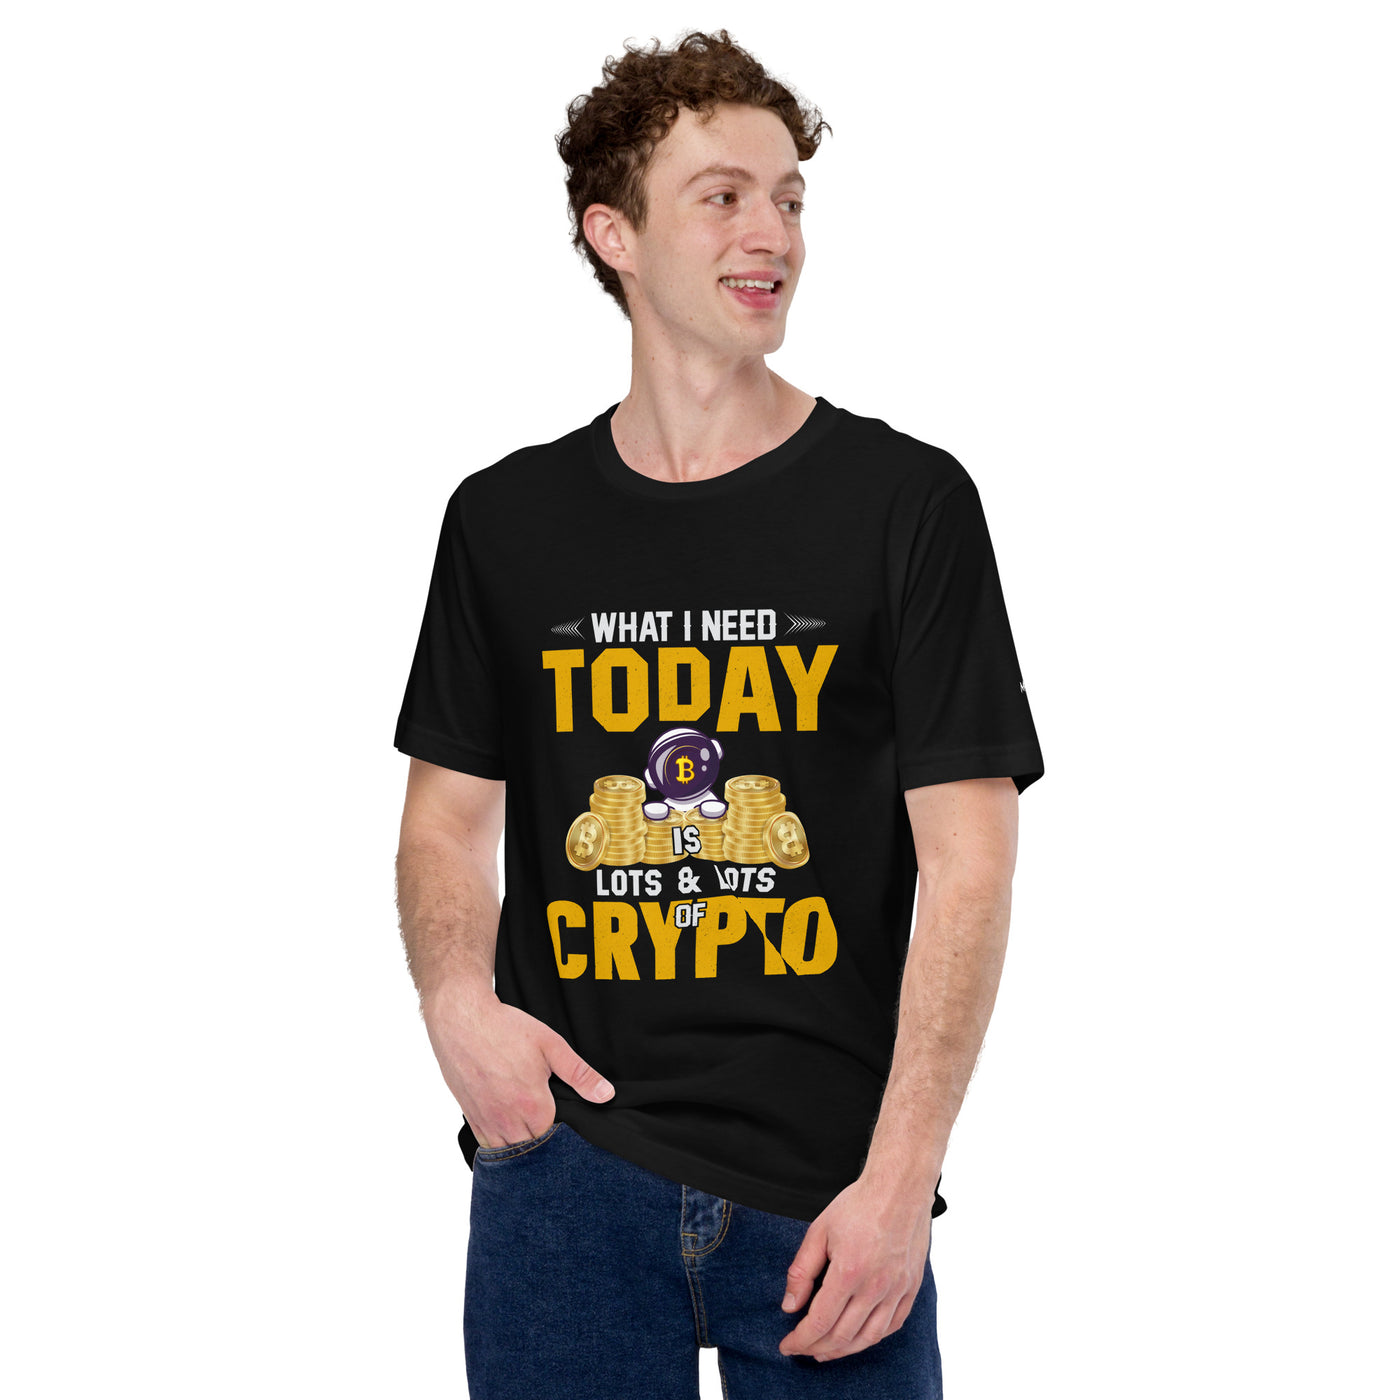 What I Need Today is Lots of Lots of Crypto Unisex t-shirt